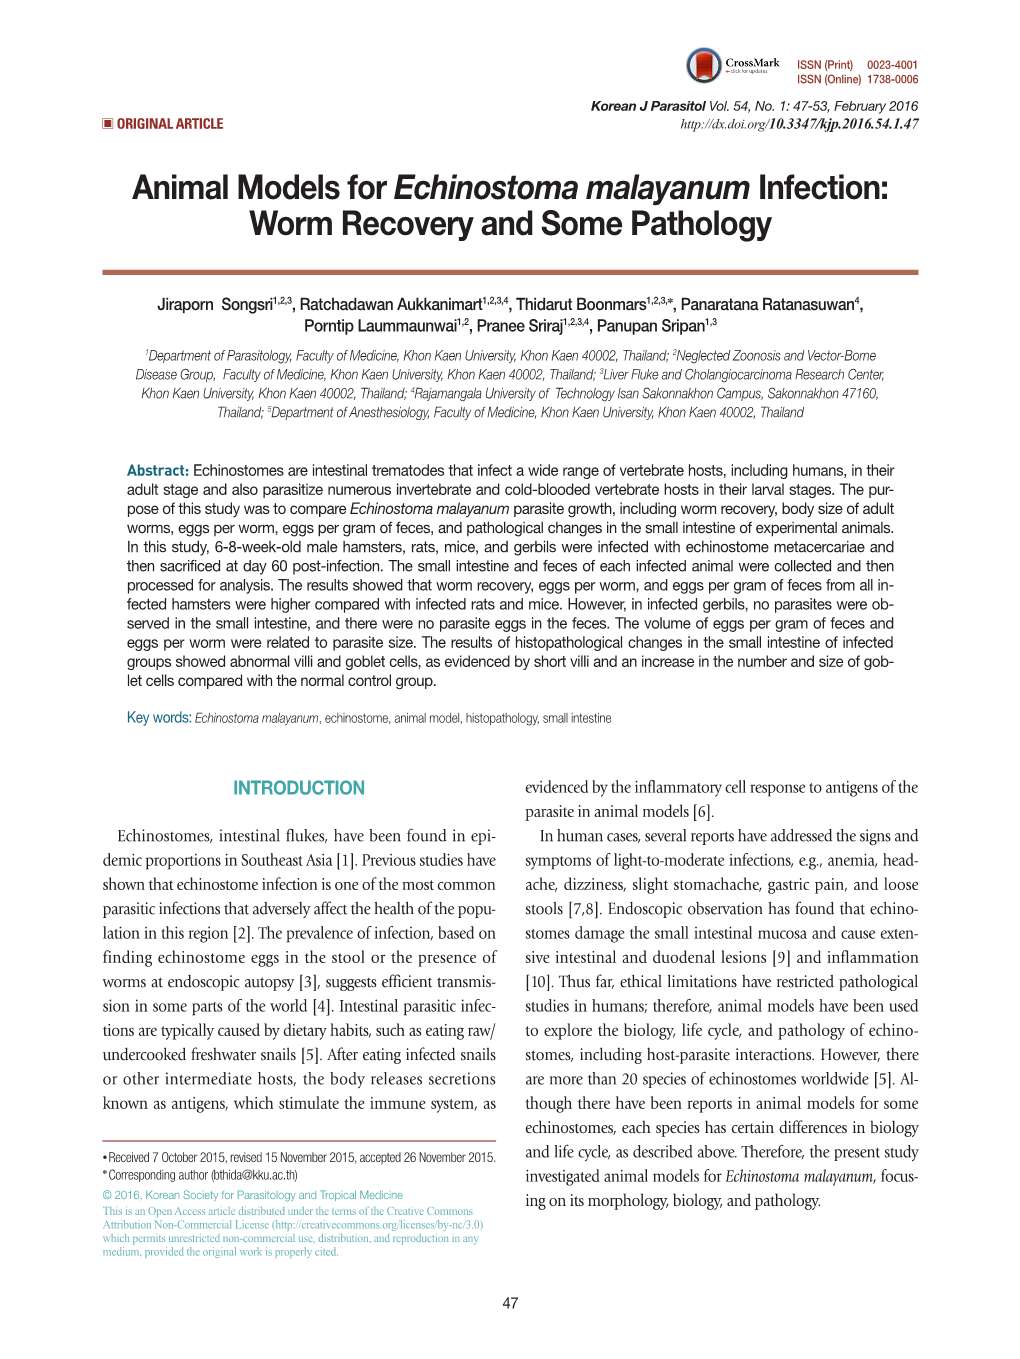 Animal Models for Echinostoma Malayanum Infection: Worm Recovery and Some Pathology